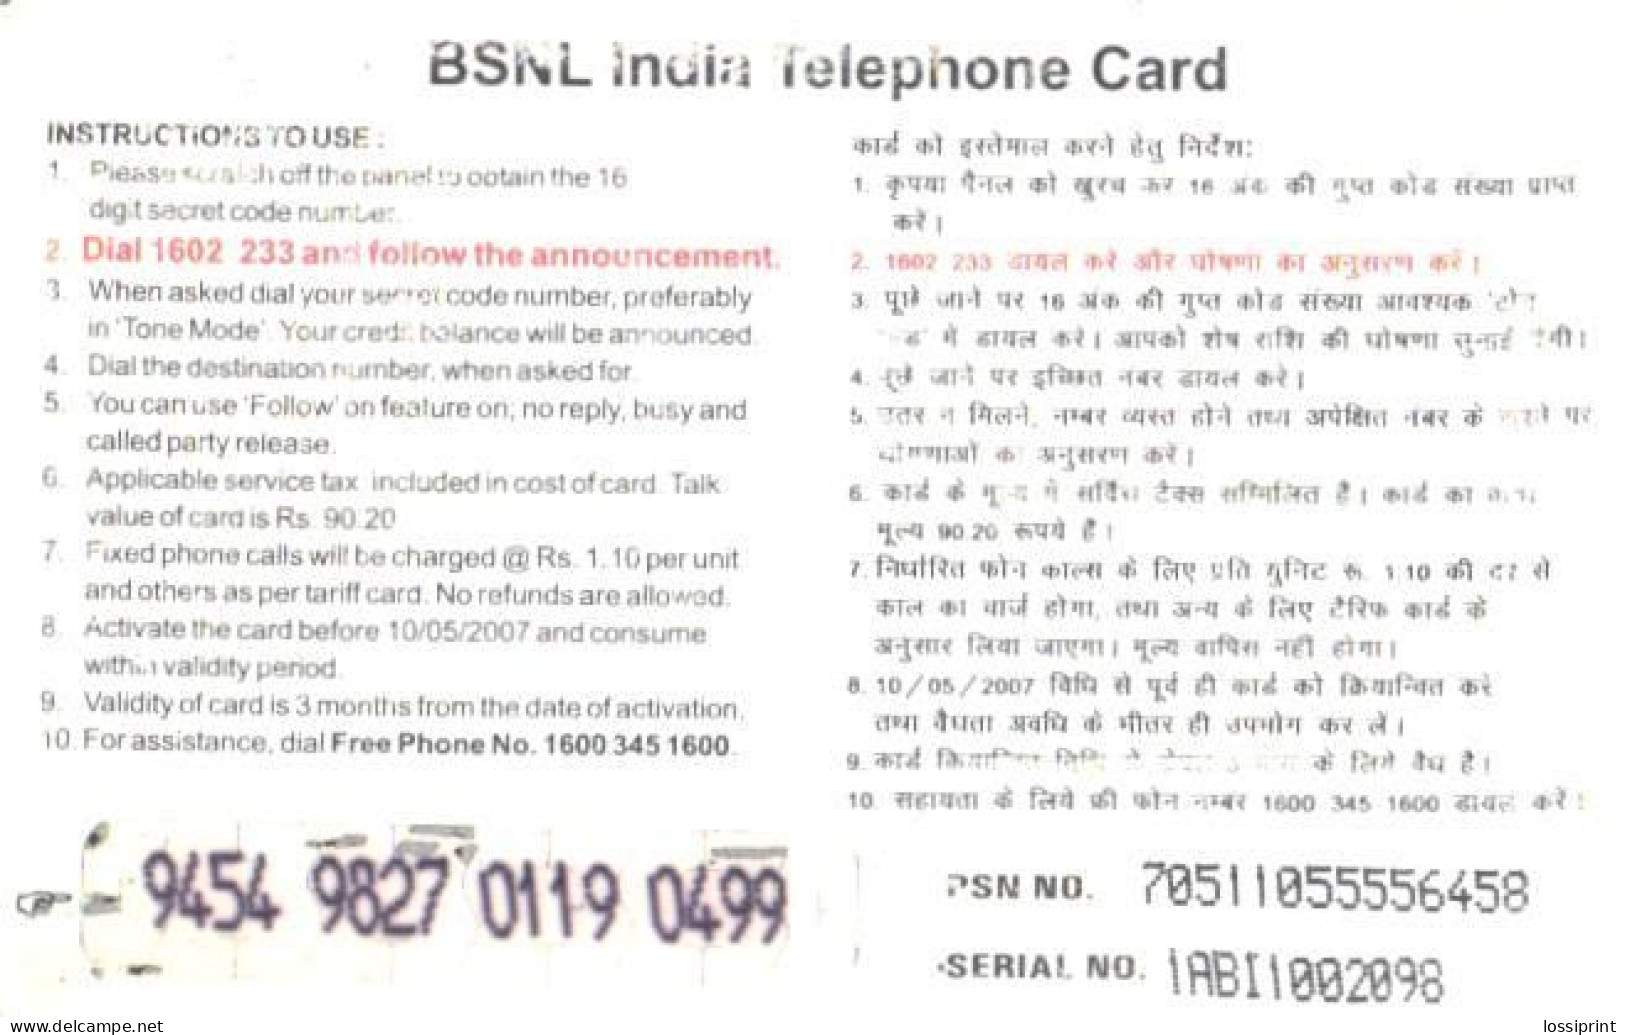 India:Used Phonecard, BSNL, 100 Rs., Building, 2007 - Indien